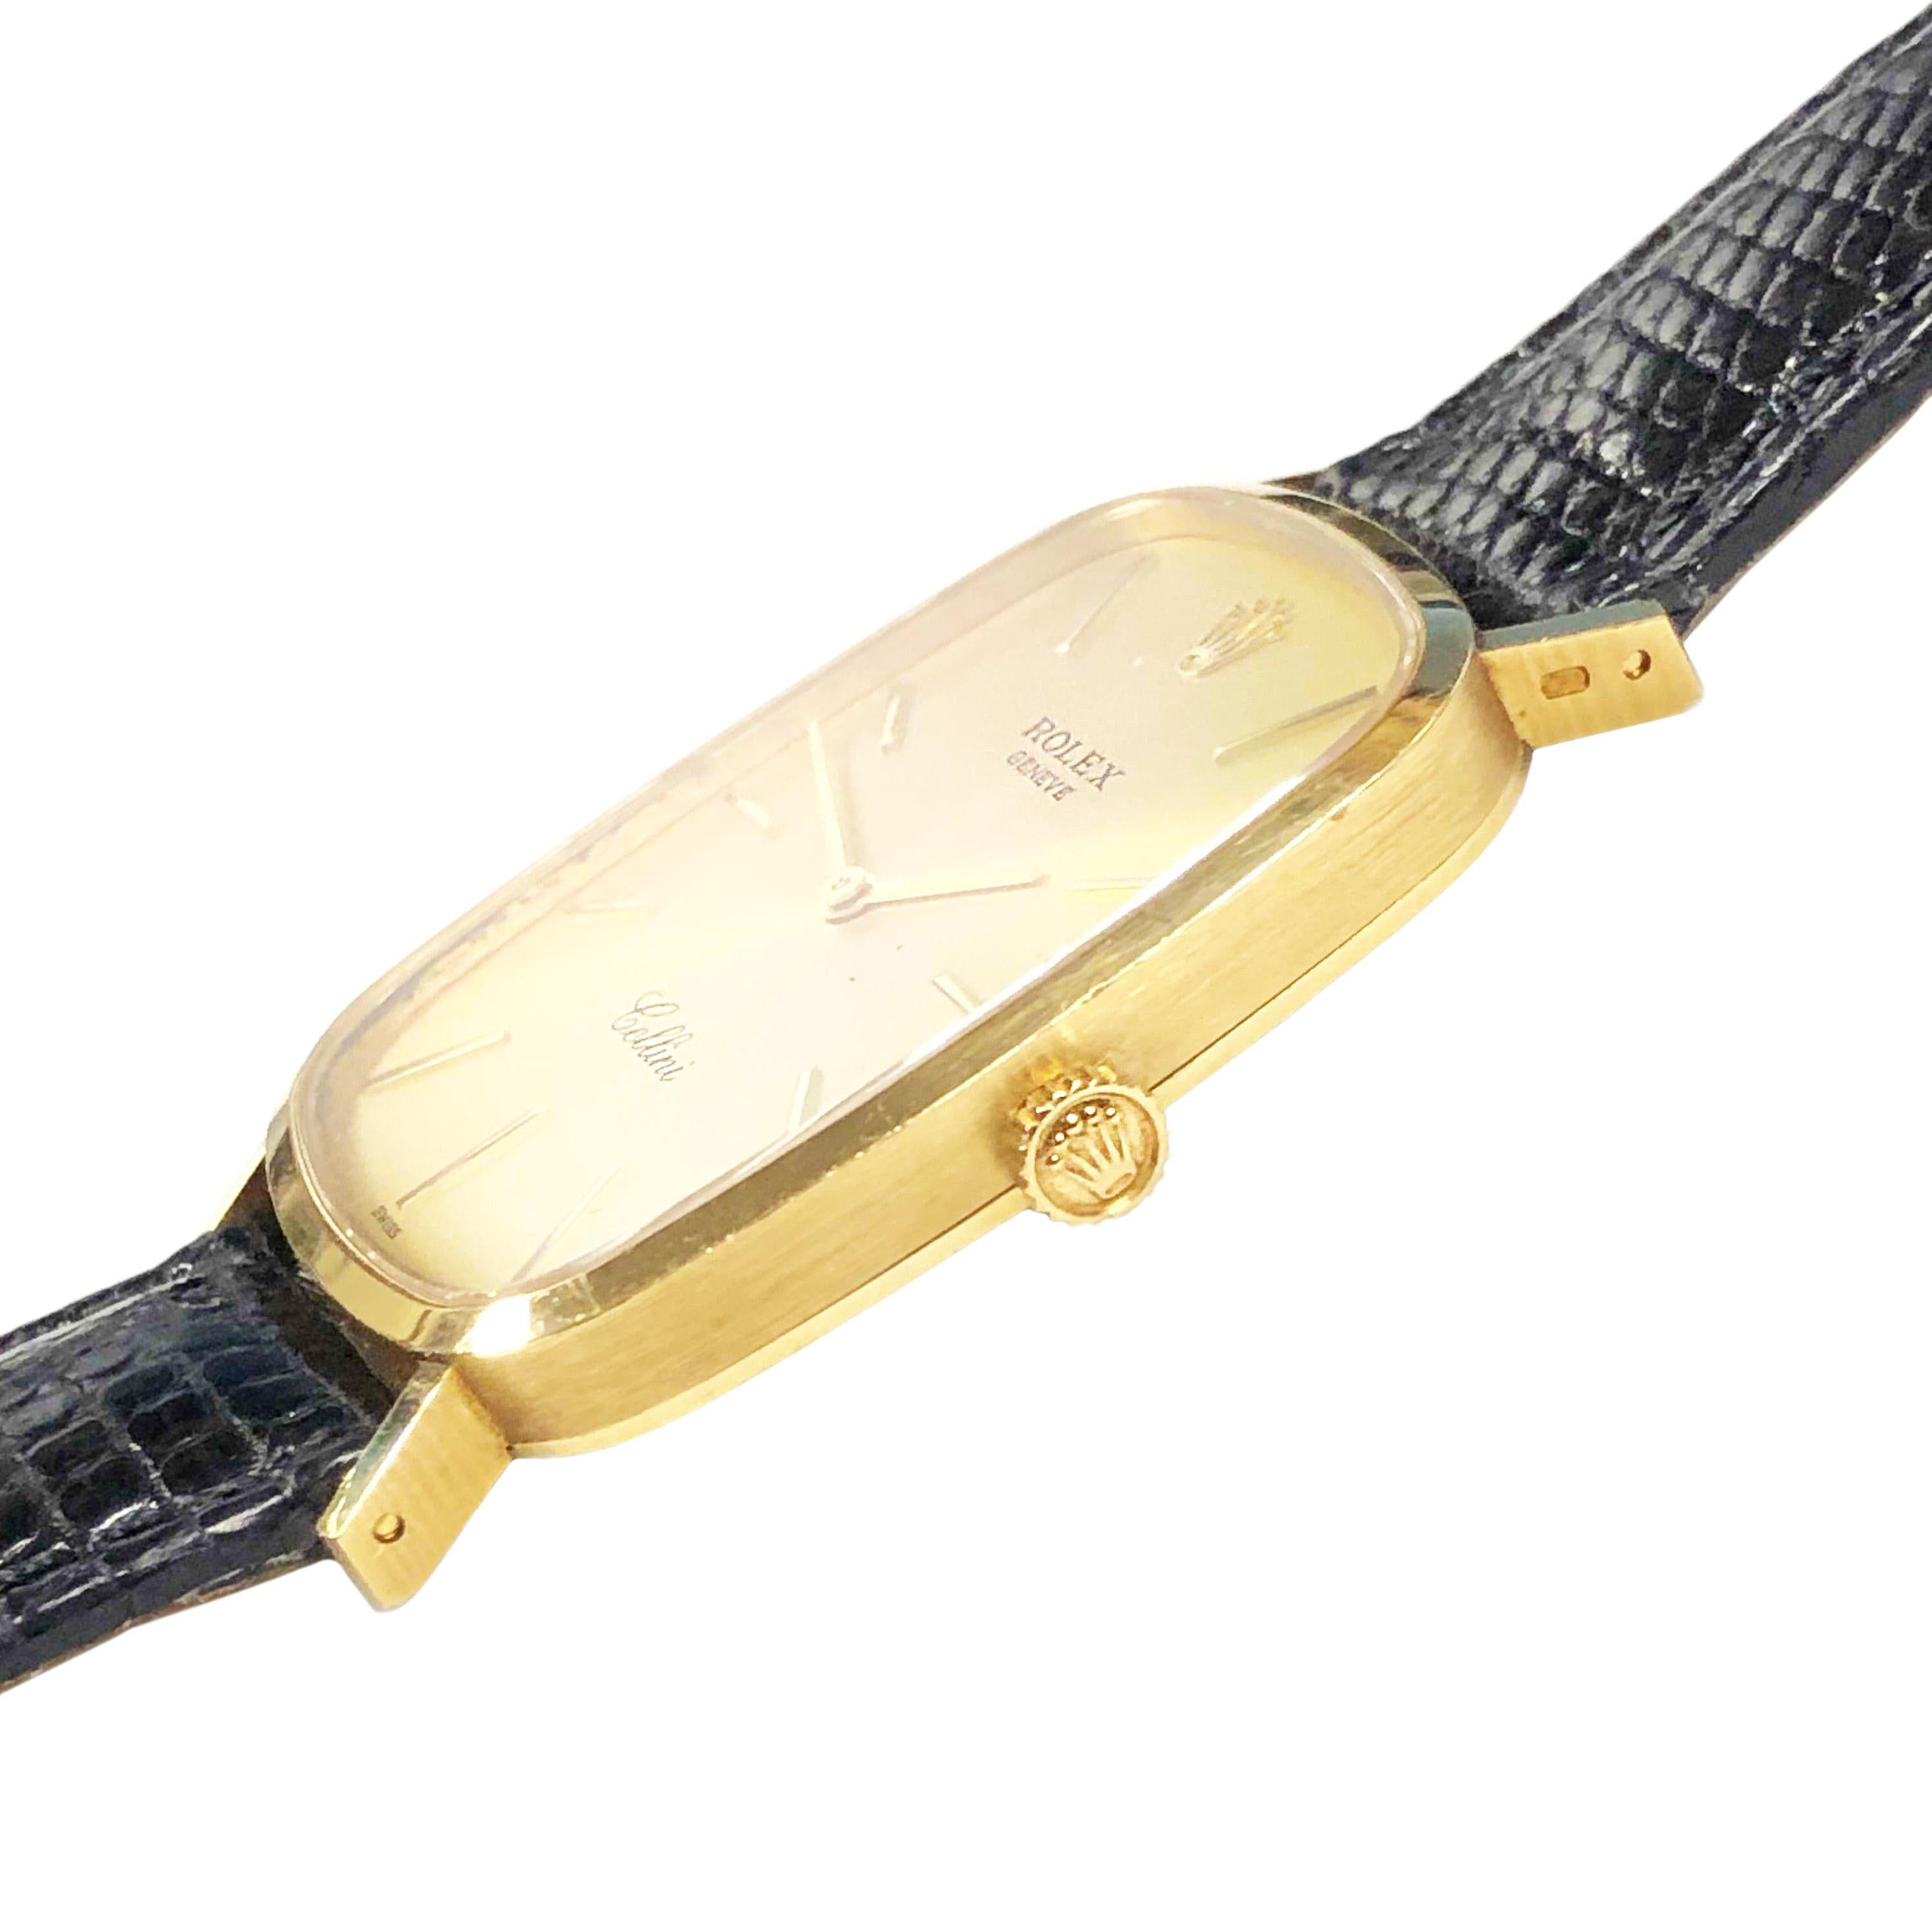 Circa 2000 Rolex Cellini Reference 4113 Wrist watch, 40 X 25 X 5 MM 18K Yellow Gold 2 Piece case. 19 Jewel Caliber 1601 Mechanical, Manual wind movement. Gold Dial with Raised Gold markers. New Black Lizard Strap with original Gold Plate Rolex